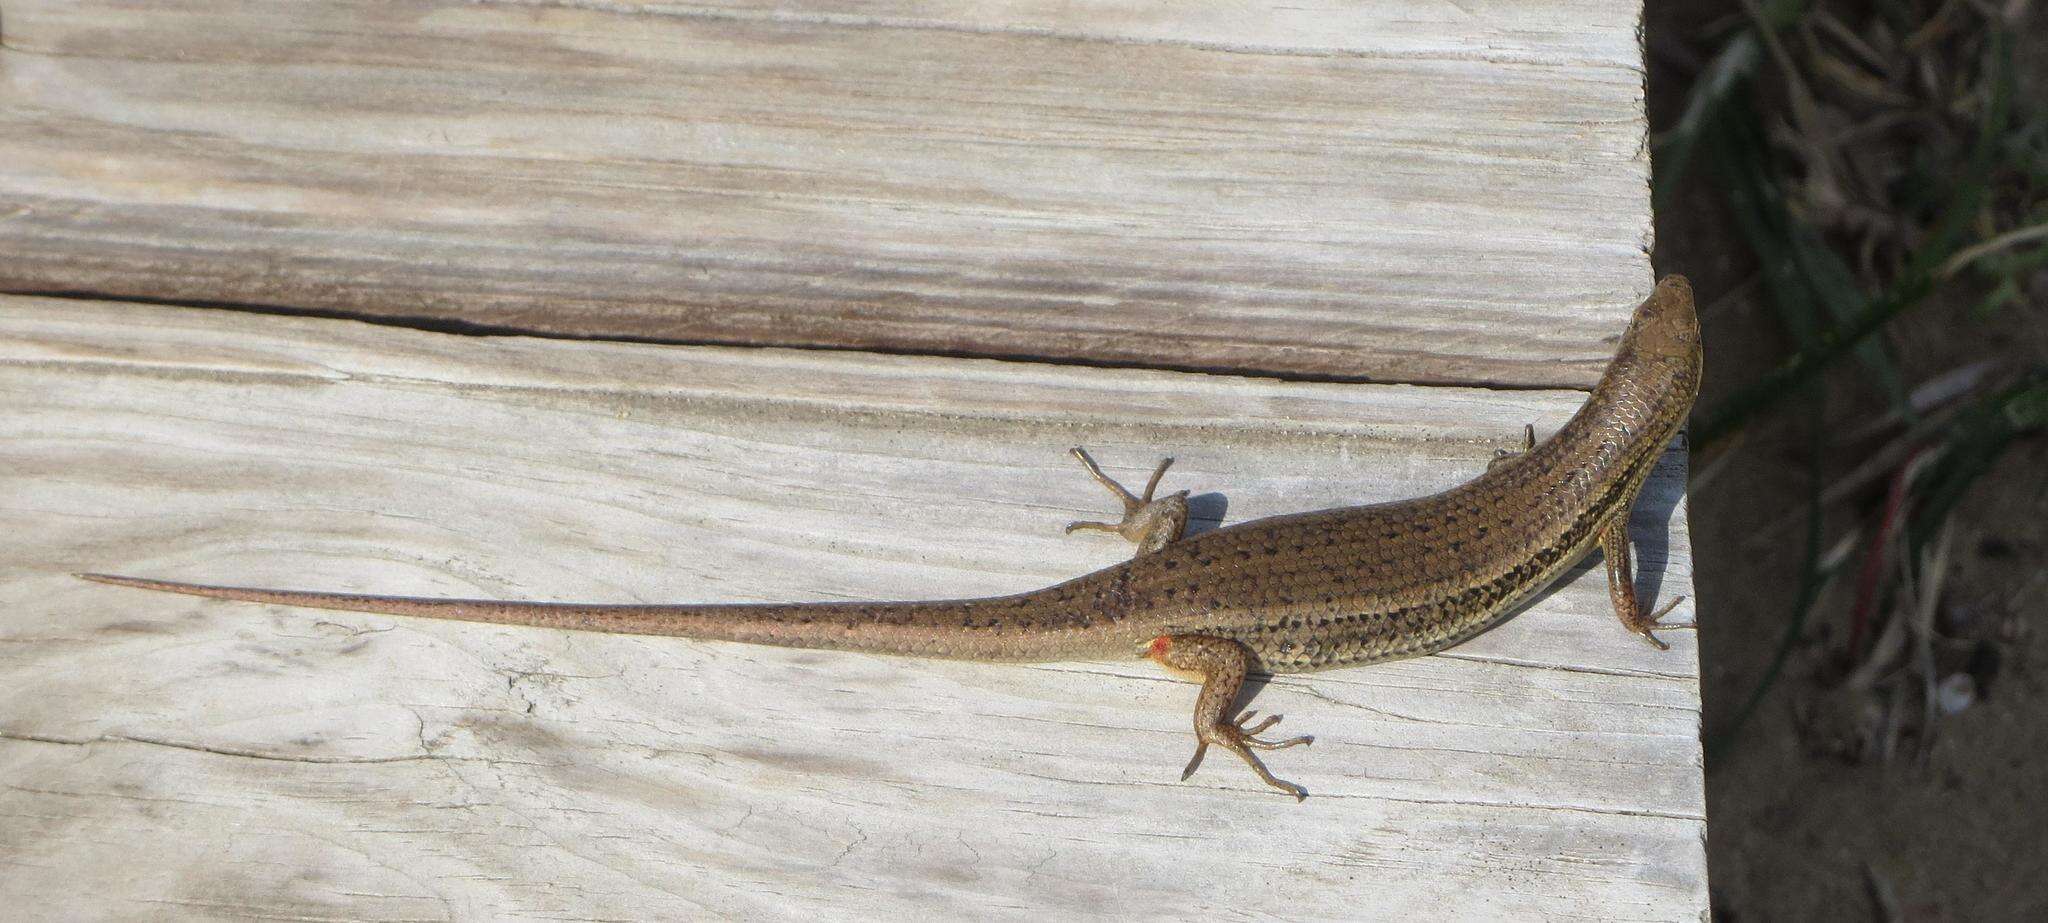 Image of Trachylepis depressa (Peters 1854)